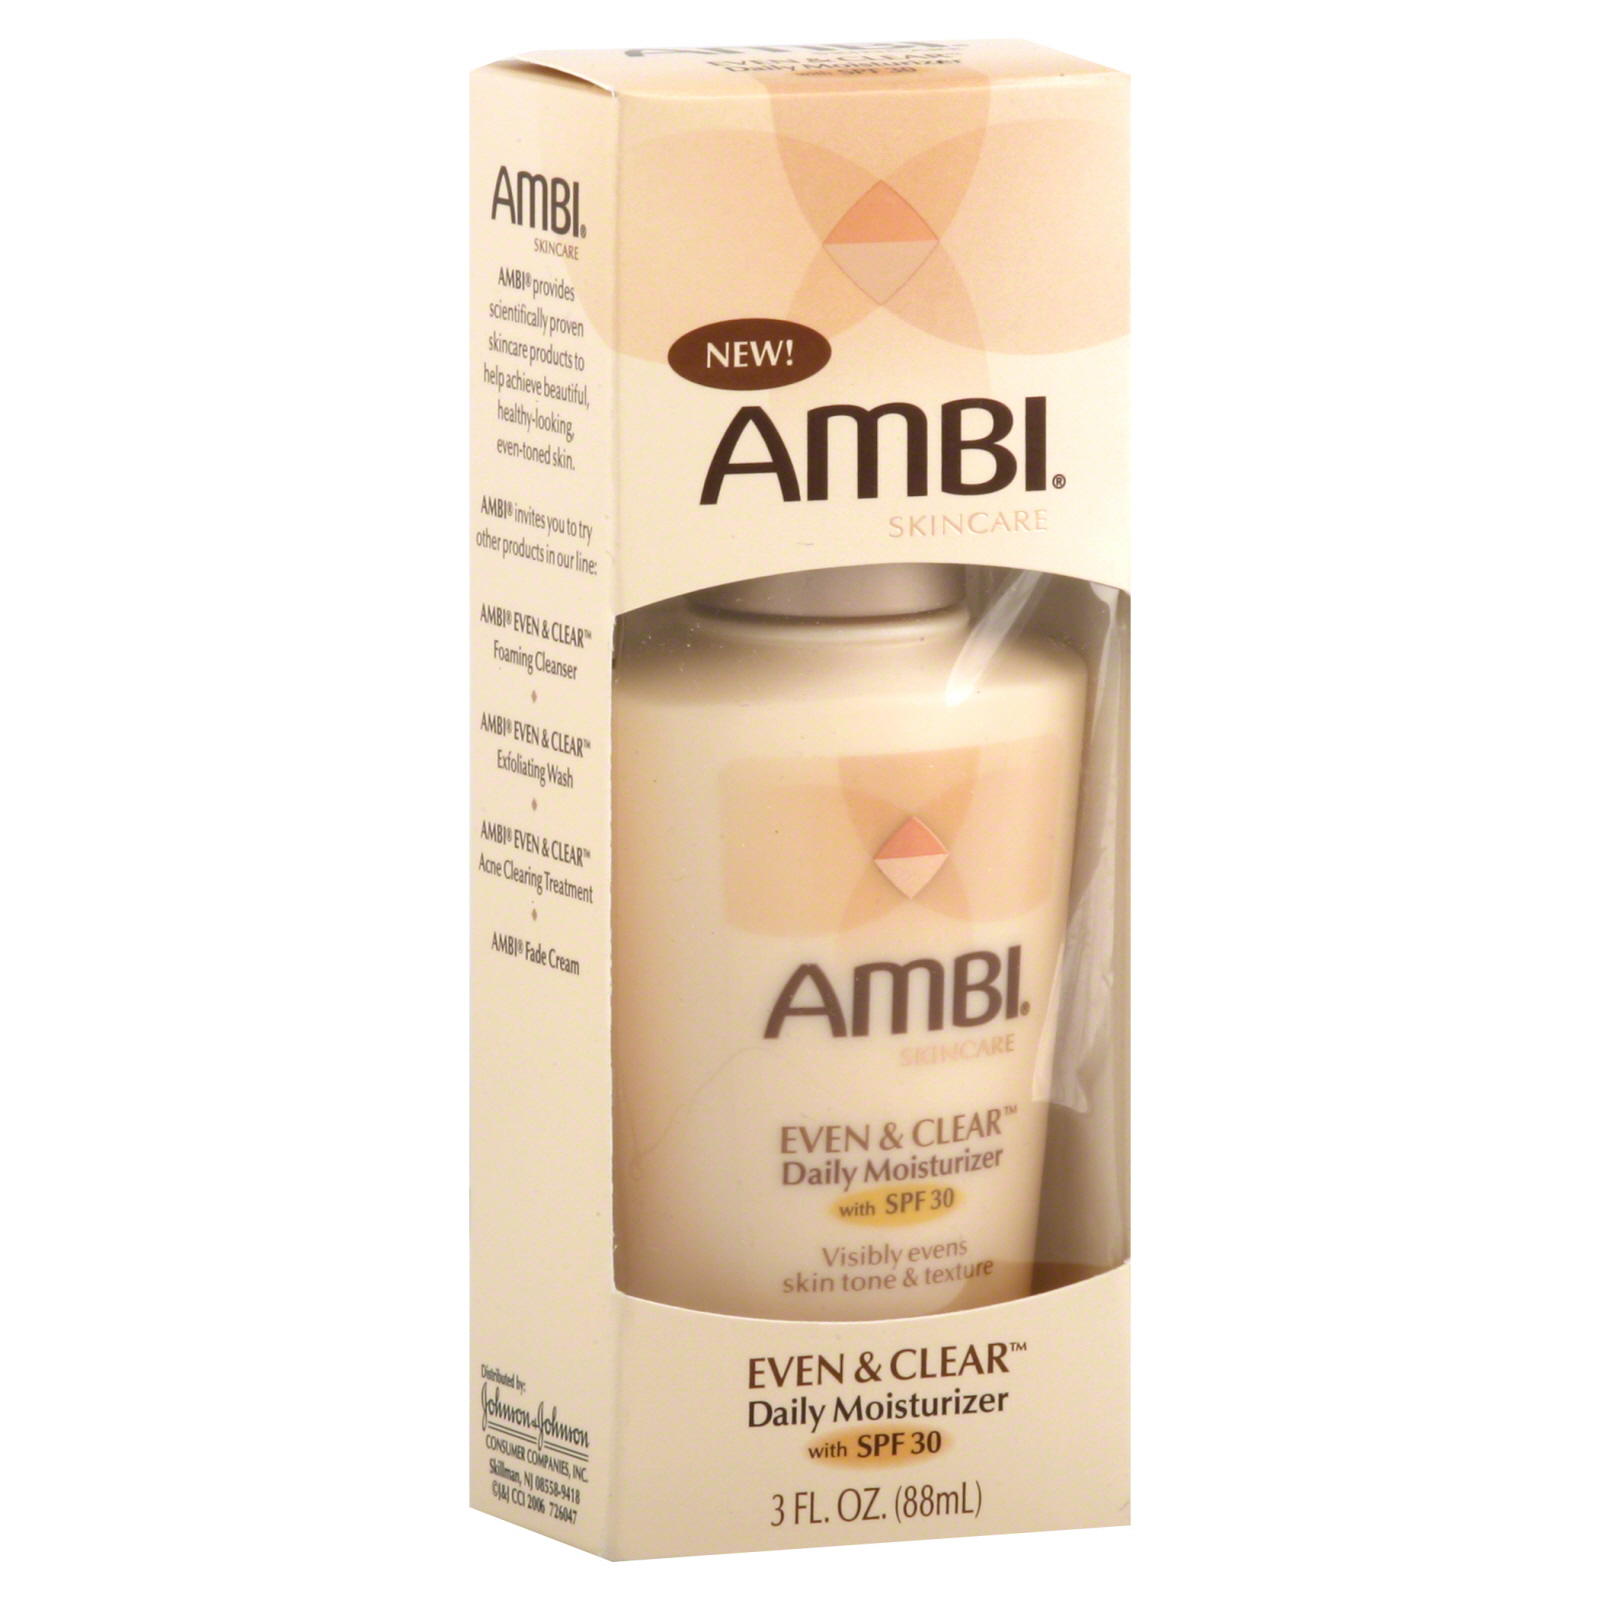 Ambi Toys Even & Clear Daily Moisturizer with SPF 30, 3 fl oz (88 ml)